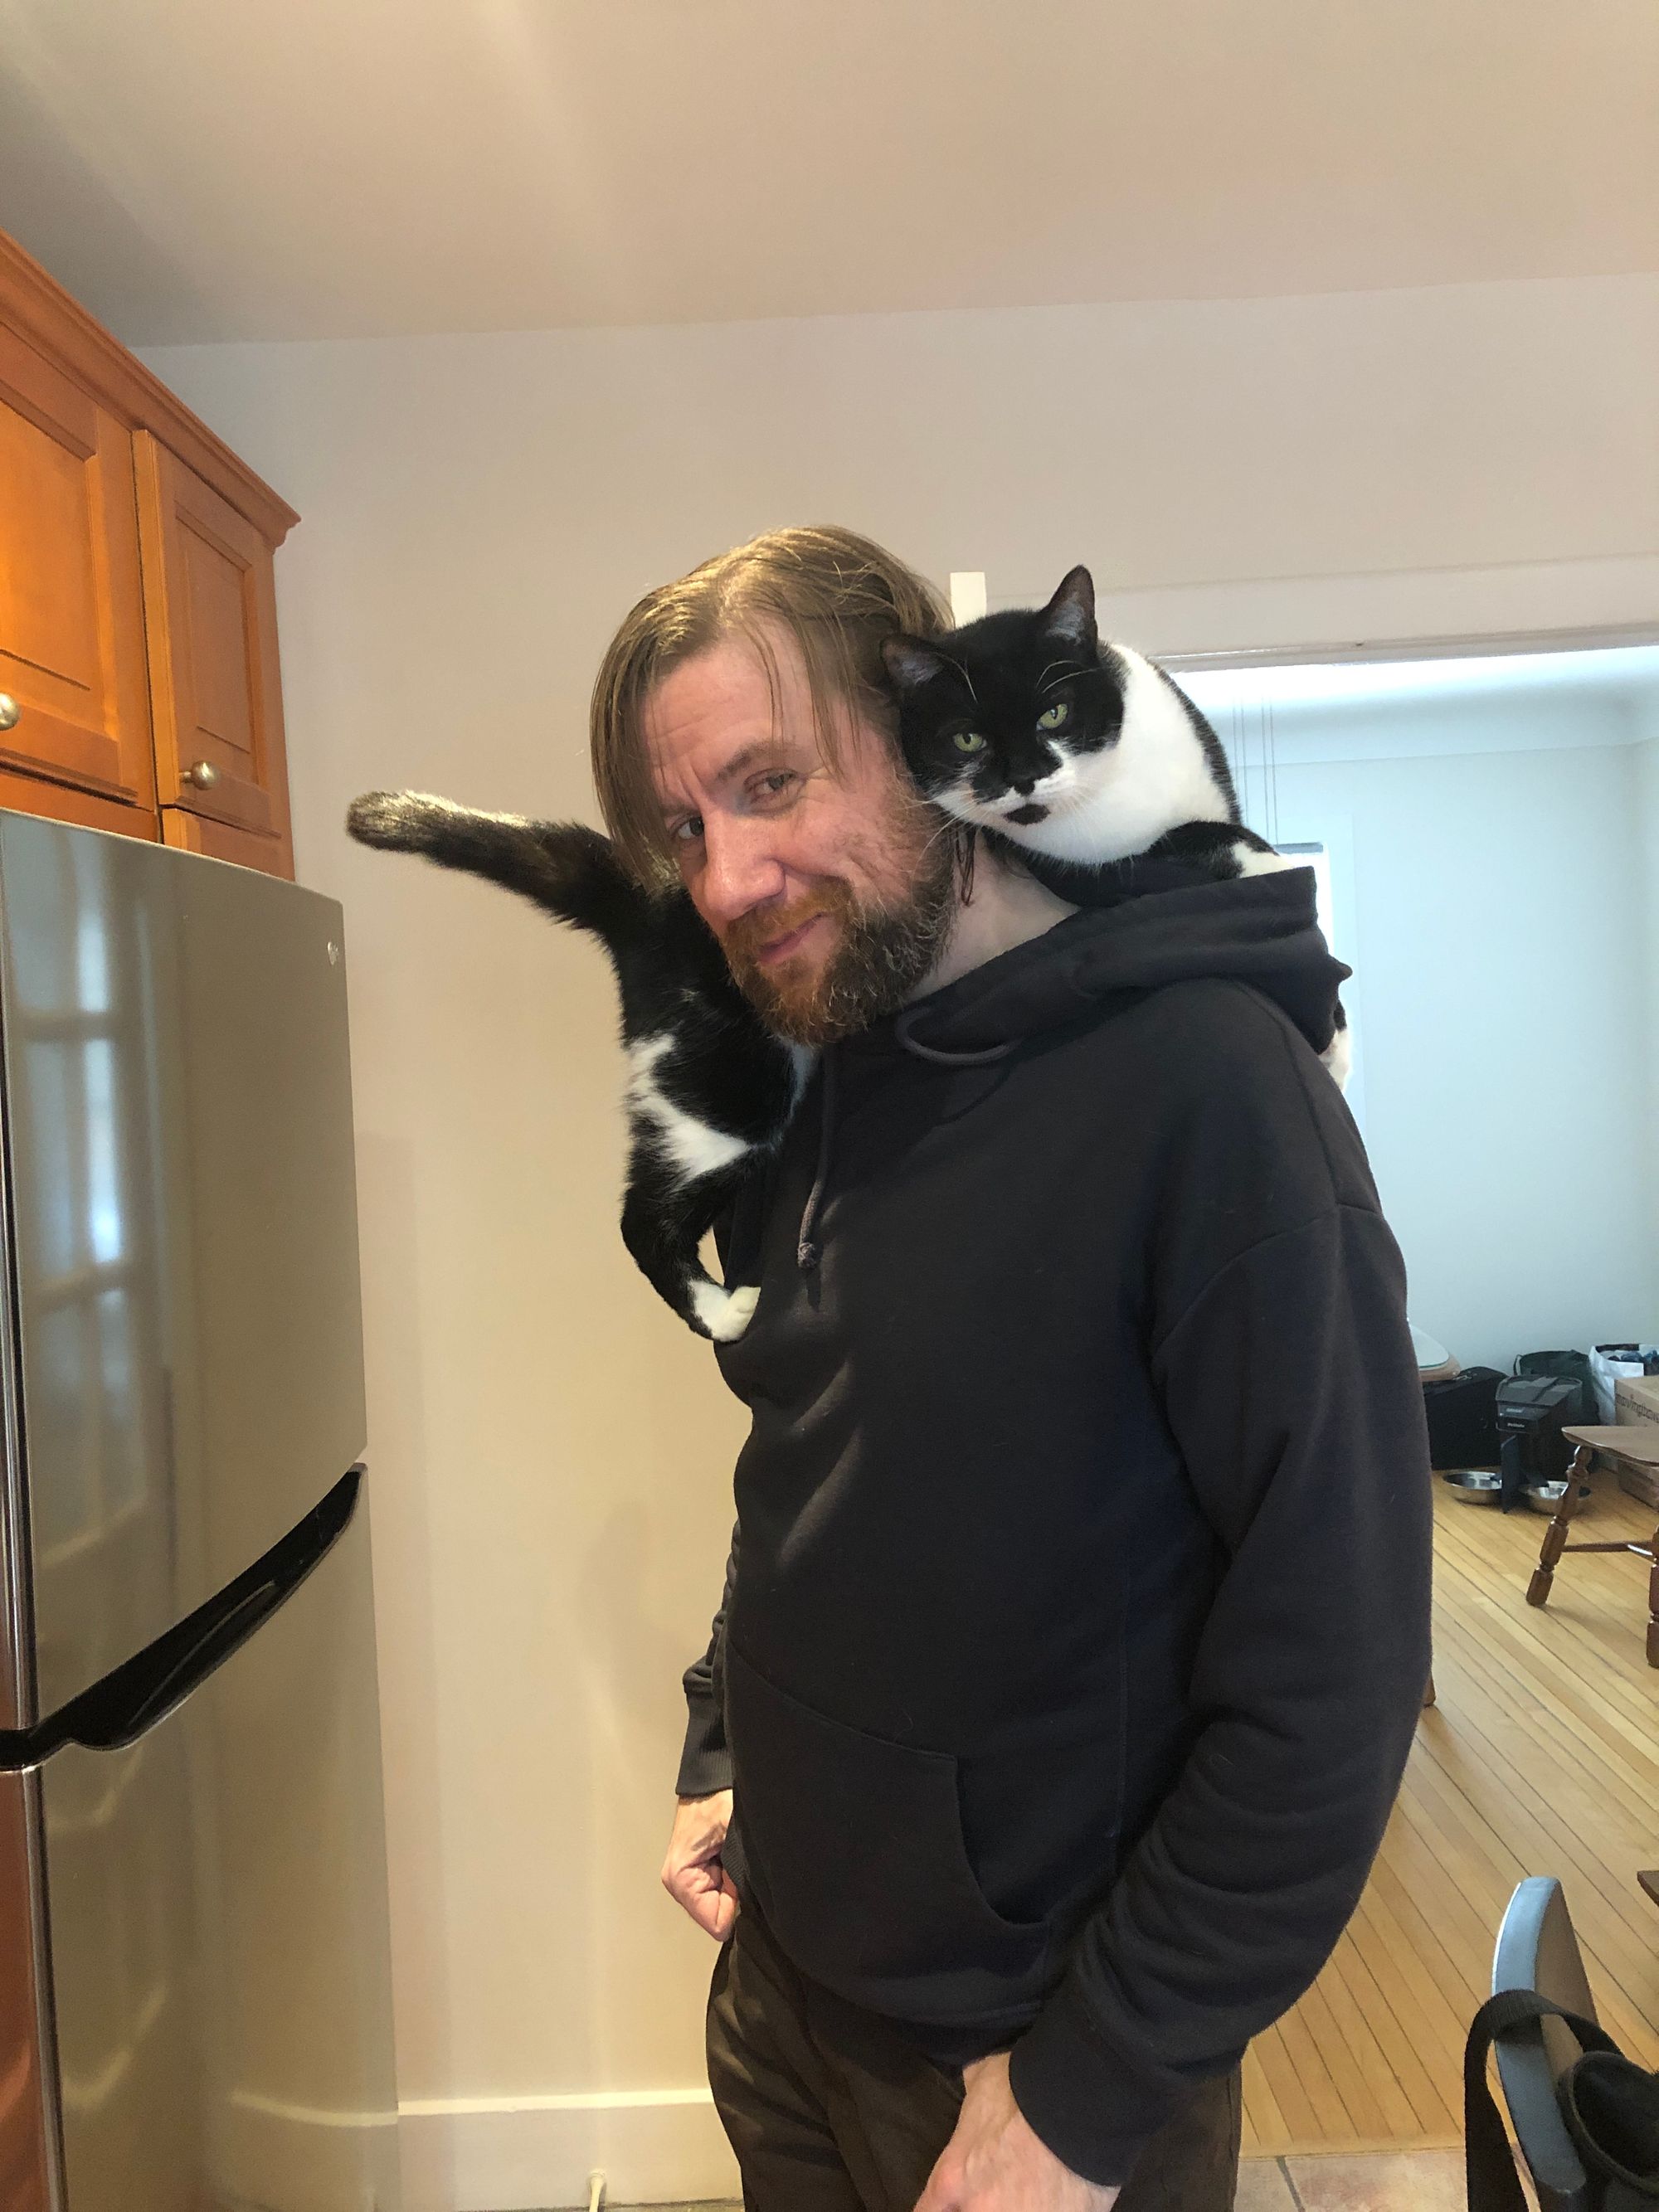 A black and white cat (Millie) is draped over the shoulder of a ginger-bearded man in a hoodie (Stu).